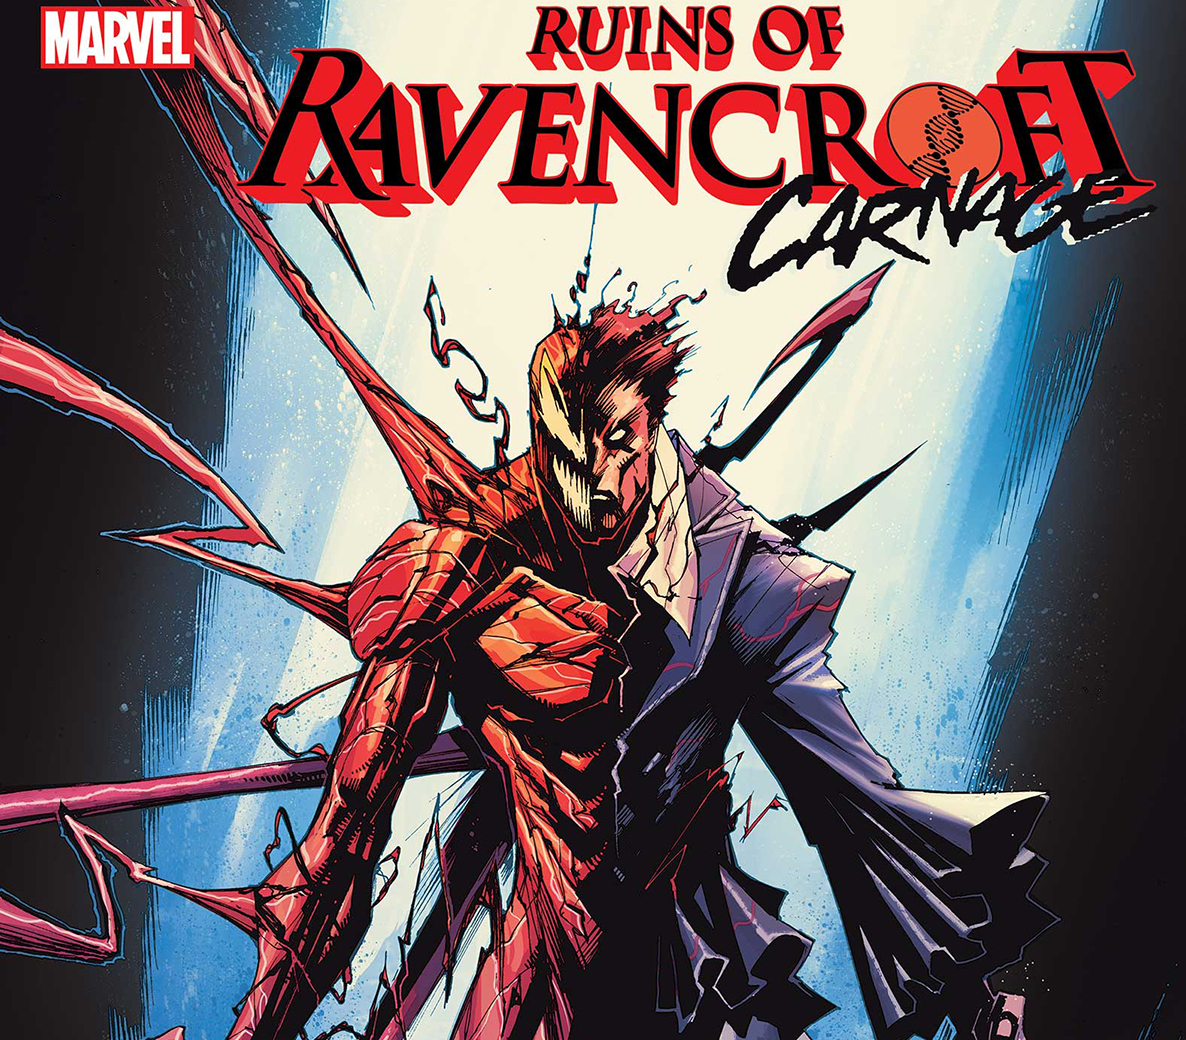 Ruins of Ravencroft: Carnage #1 Review